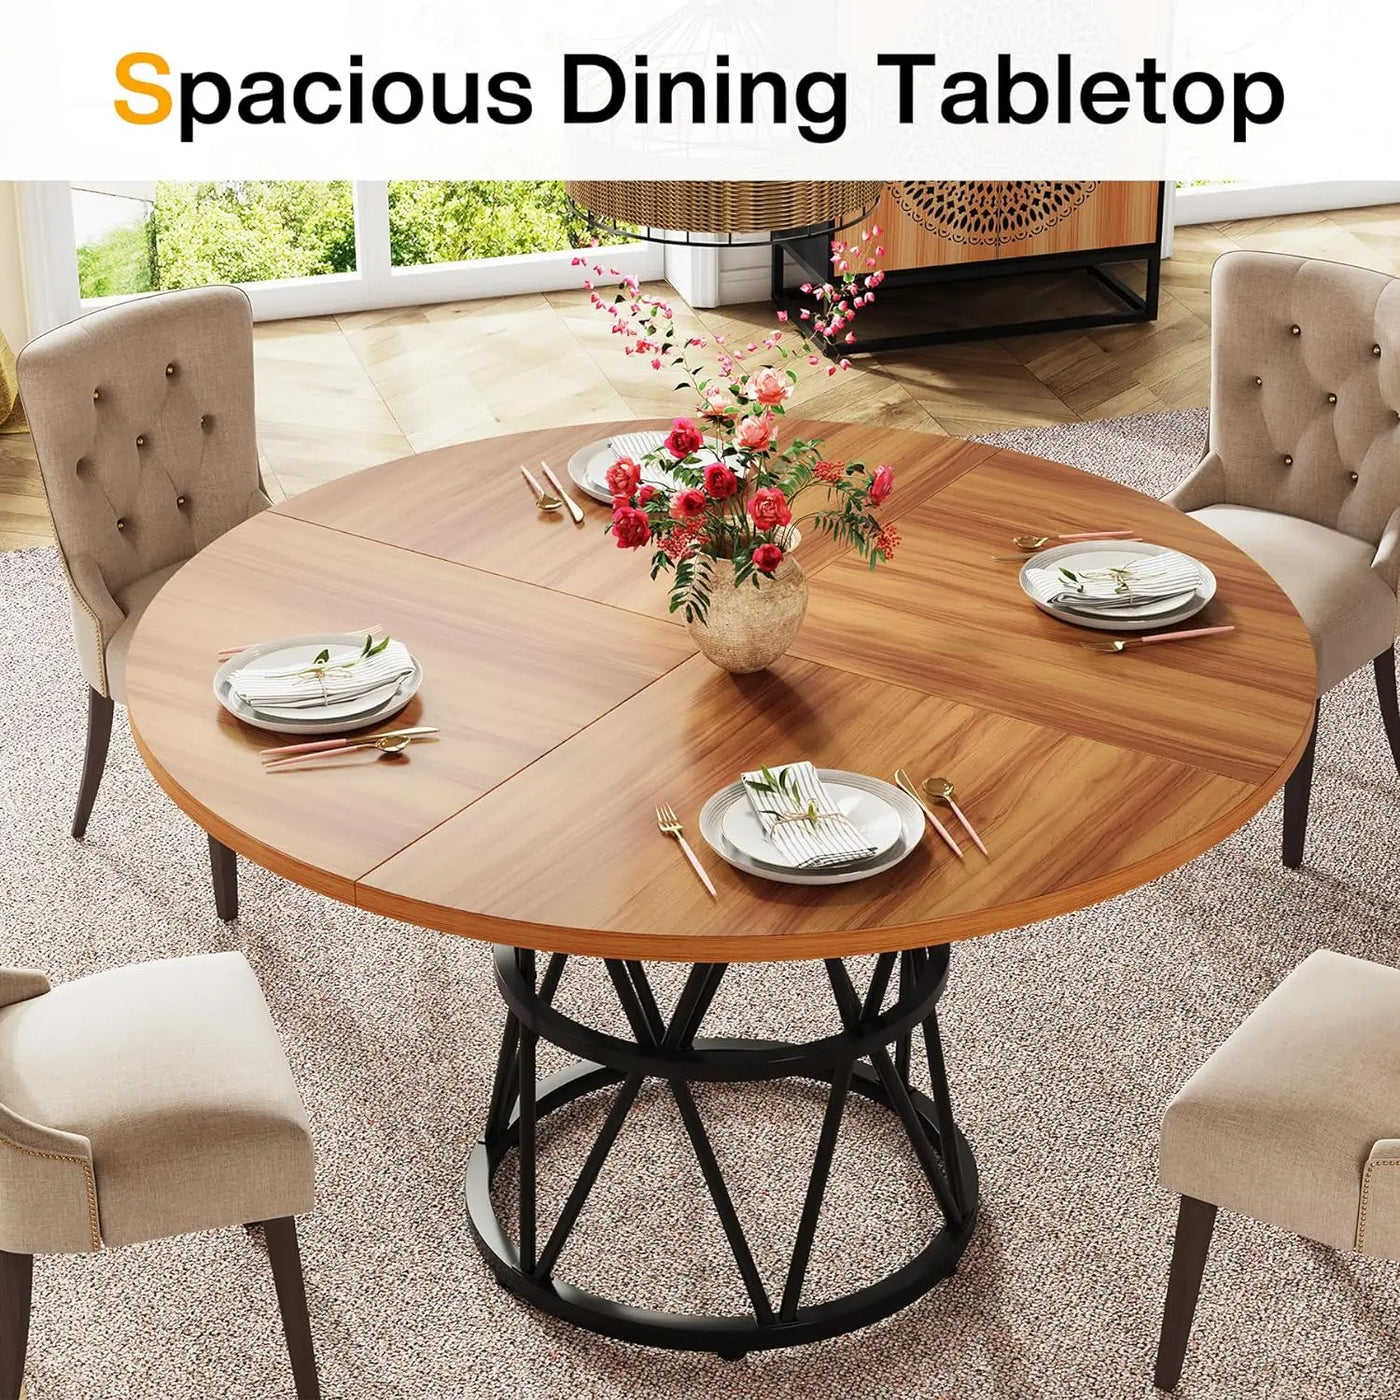 Gianna Round Dining Table 47 Inches | Kitchen Table Circle Wood Dining Room Metal Base